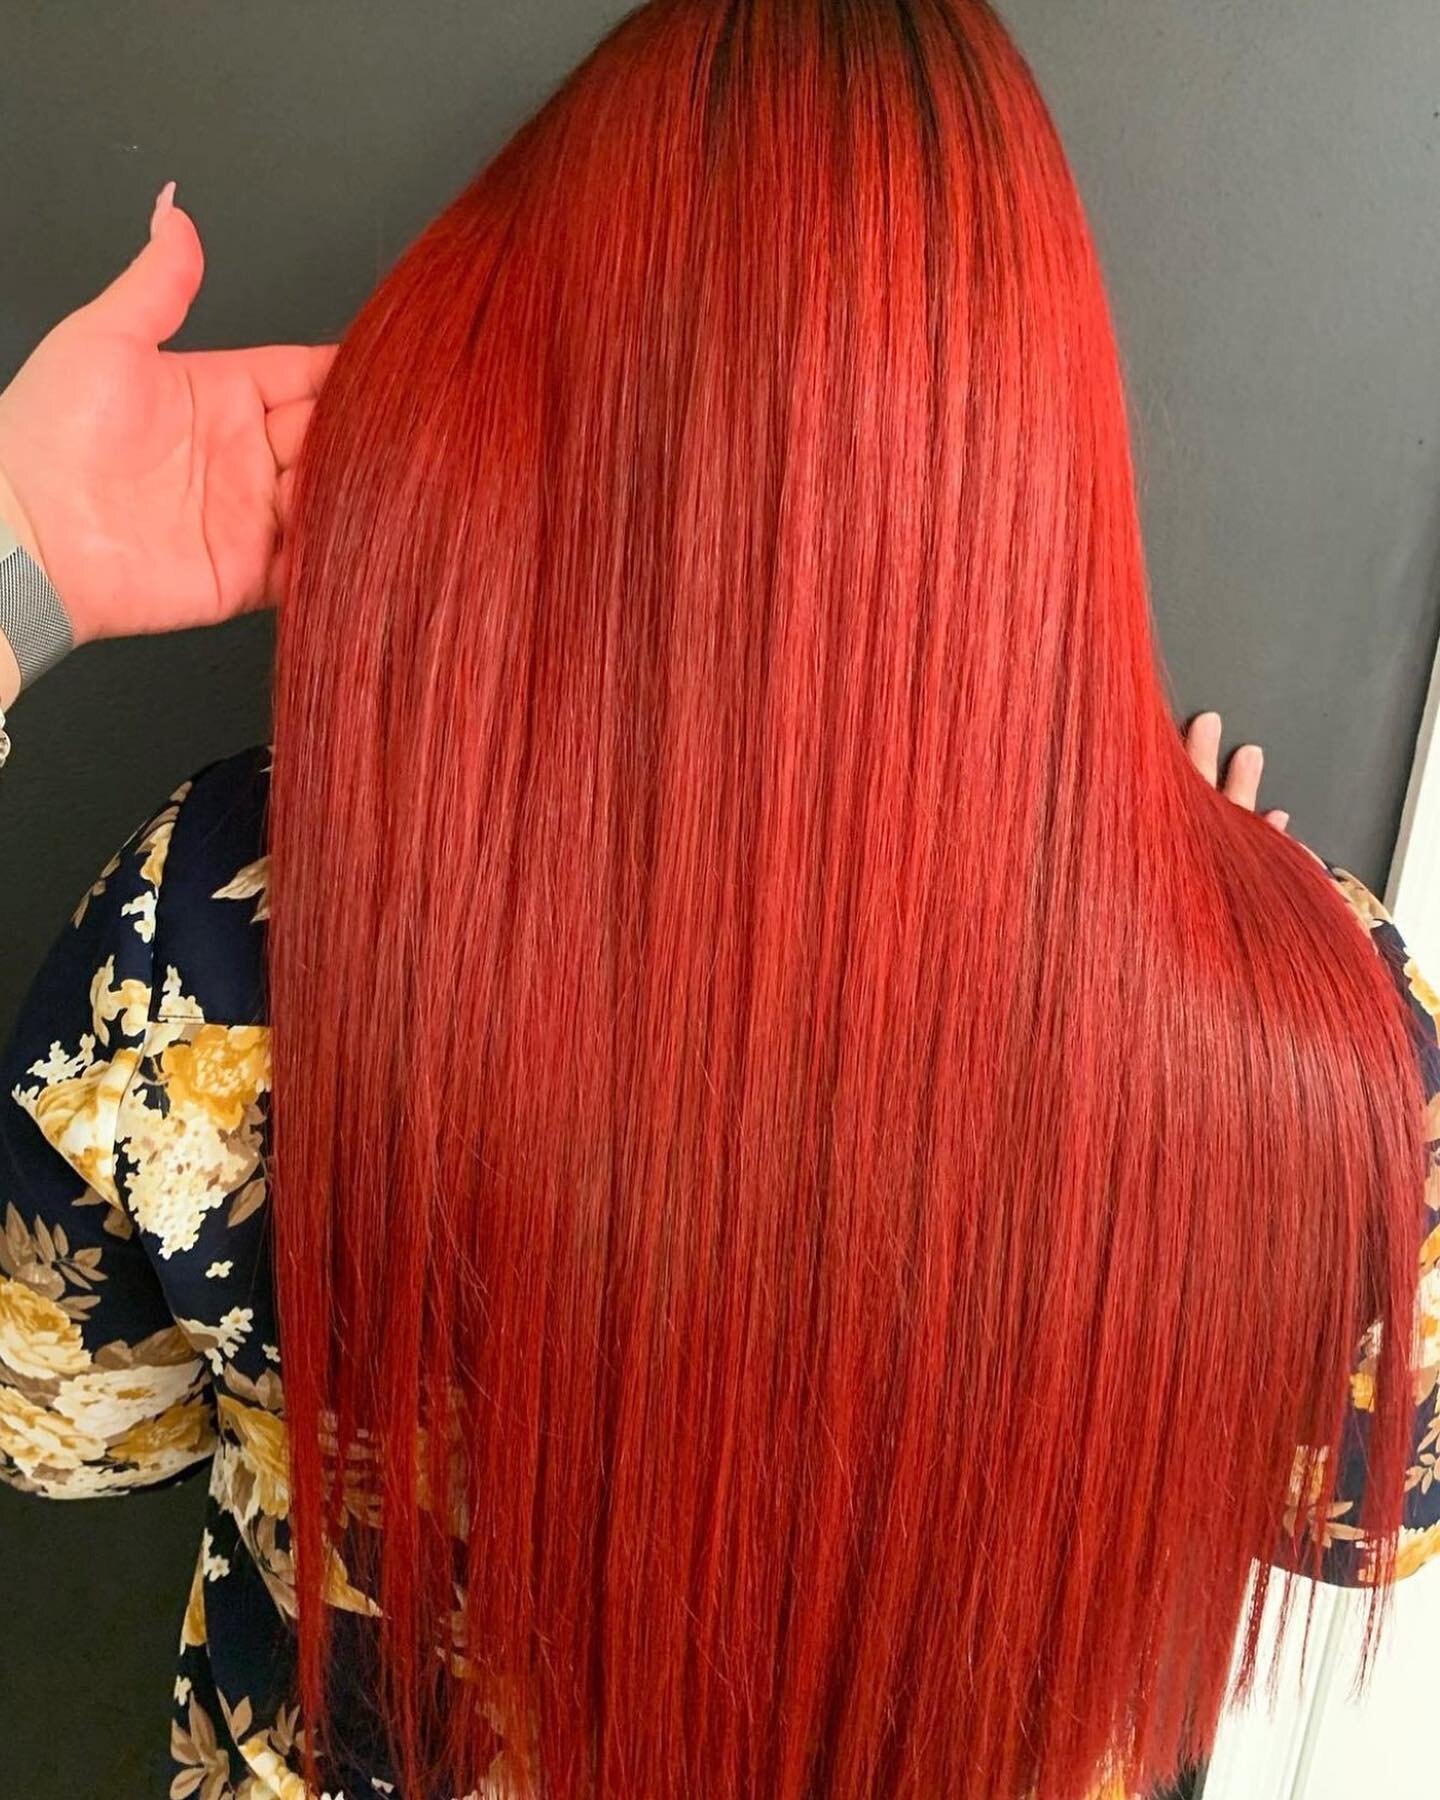 Can we take a moment for this spicy red hair 🌶🔥😮&zwj;💨
&bull;
&bull;
&bull;
&bull;

#trending #trendingnow #trendingtopic #trendingnews #trend #trends #trendy #trendyhair #trendhairstyle #explorepage #explore #explorepage✨ #exploremore #hair #hai